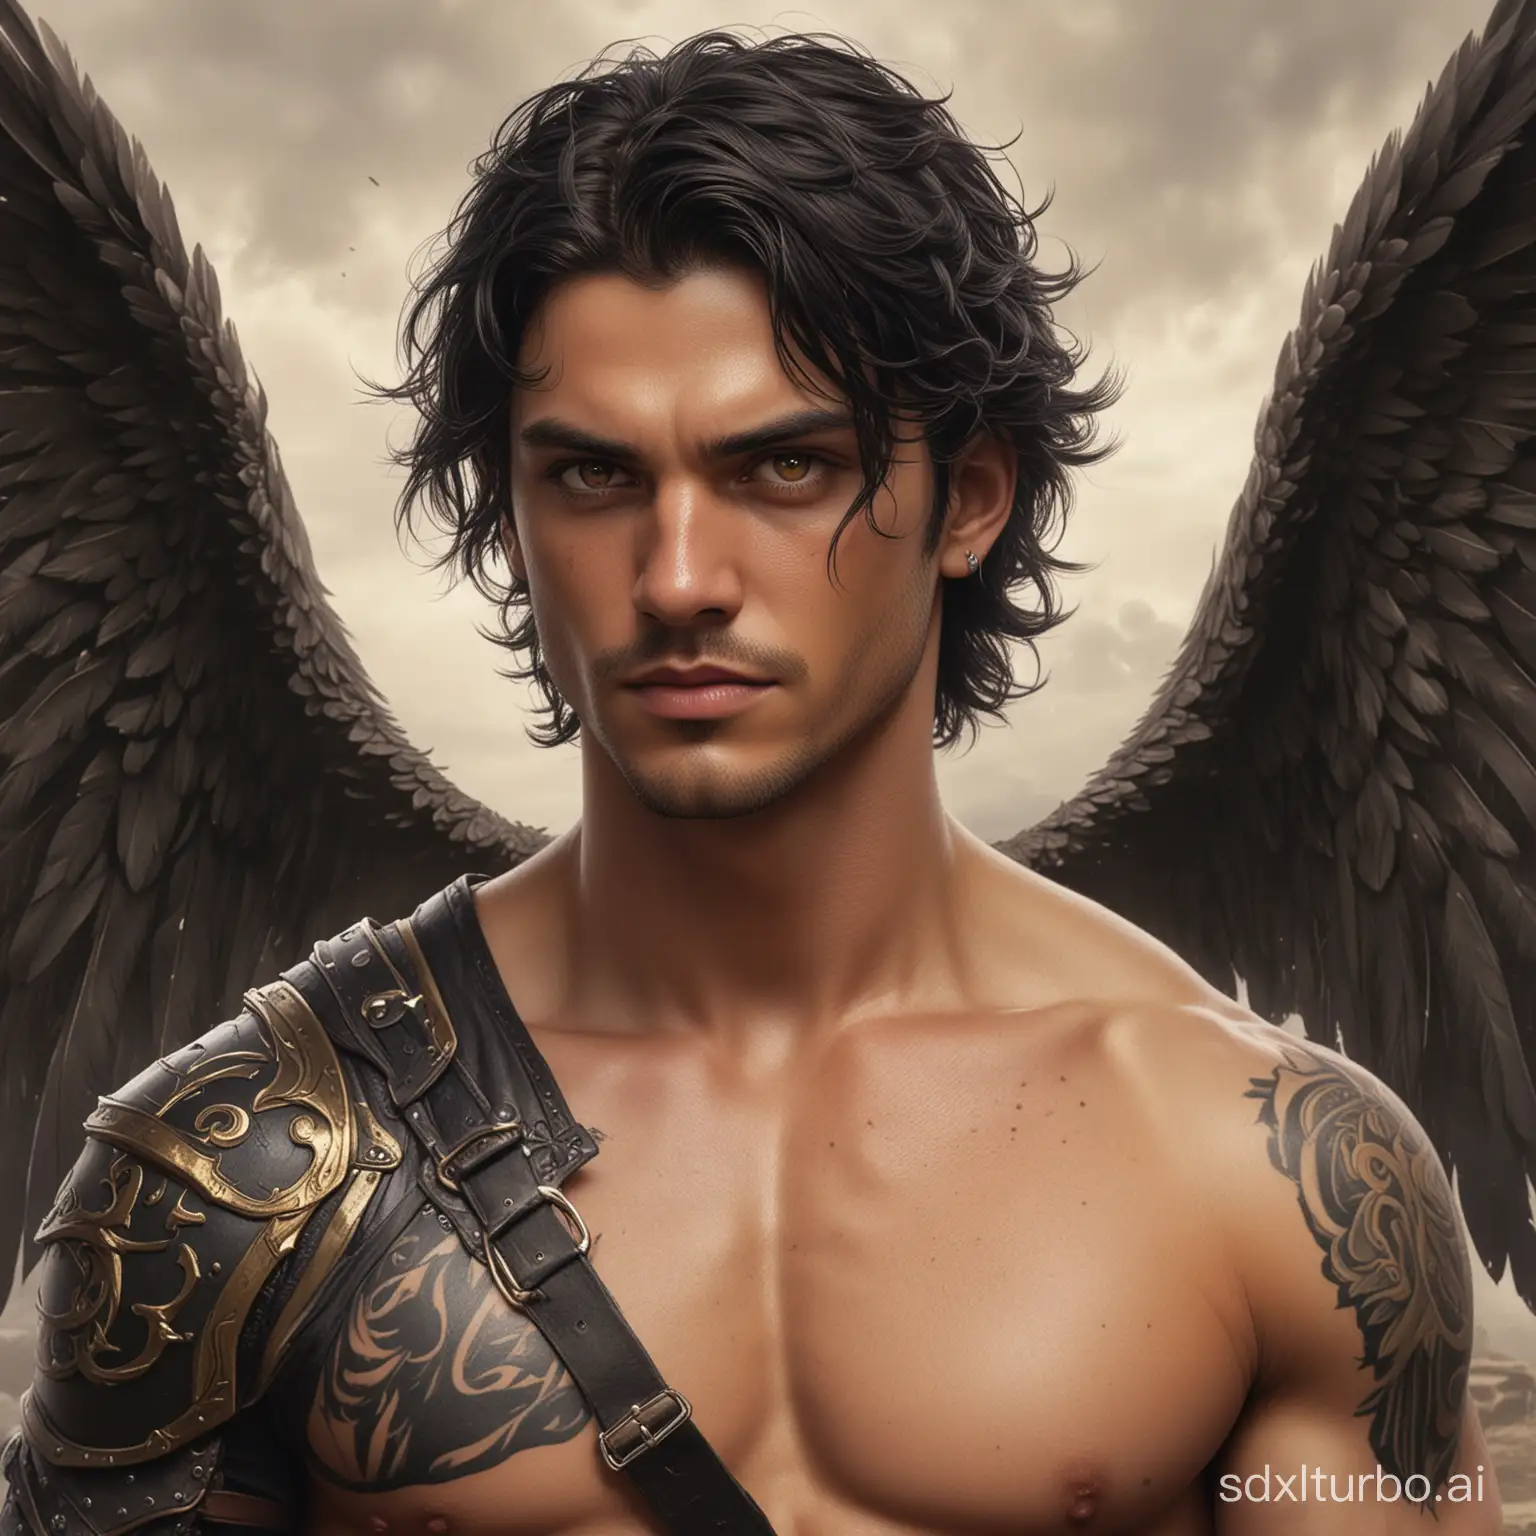 Male, black hair, wavy hair, shoulder long hair, black wings, early thirties, golden eyes, toned, attractive, handsome, bruised, manly, book character art, warrior, tattoos